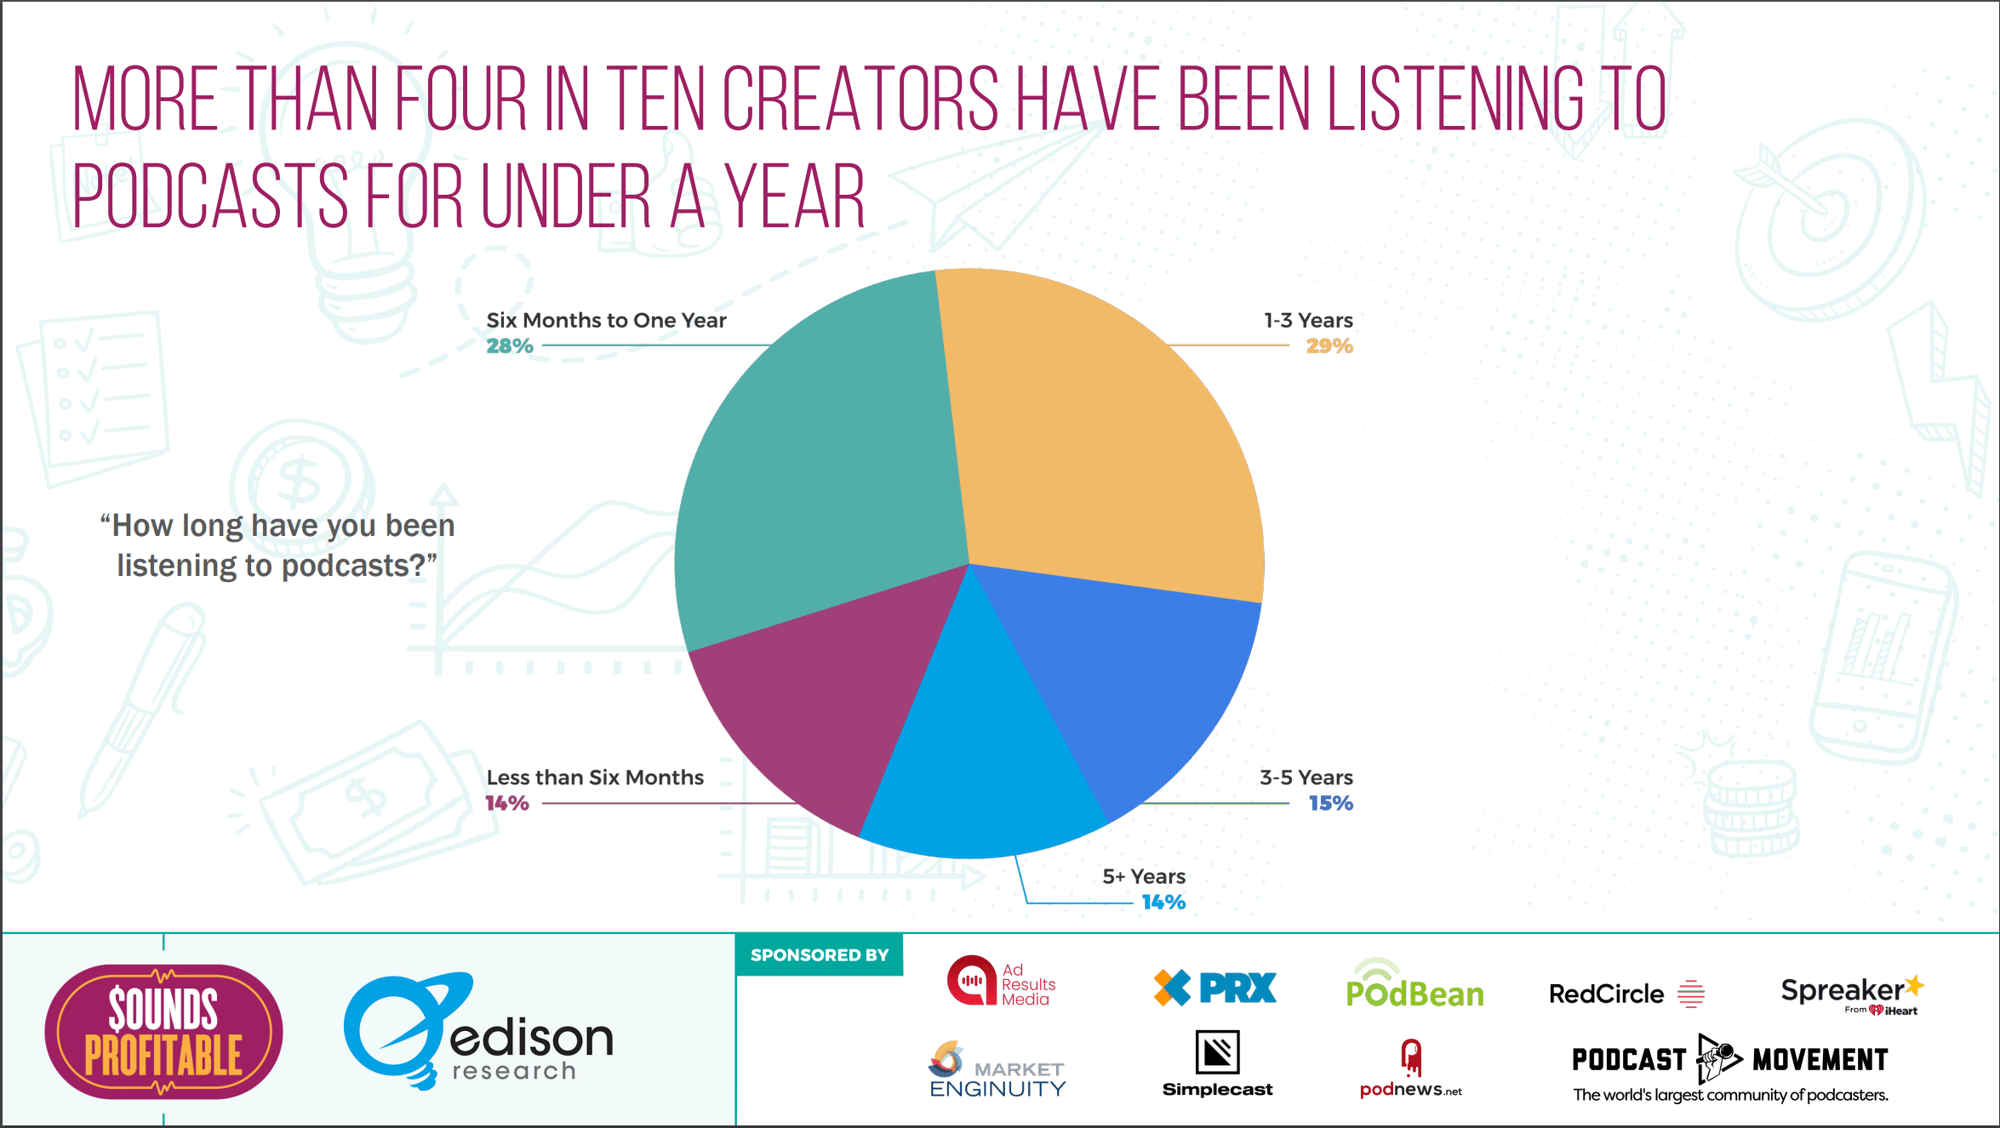 Single Pie Chart titled More Than Four in Ten Creators Have Been Listening to Podcasts For Under a Year. Pie Chart shows 14% have listened to podcasts for less than six months; 28% have listened for six months to one year; 29% for 1-3 years; 15% for 3-5 years; and 14% for over five years.